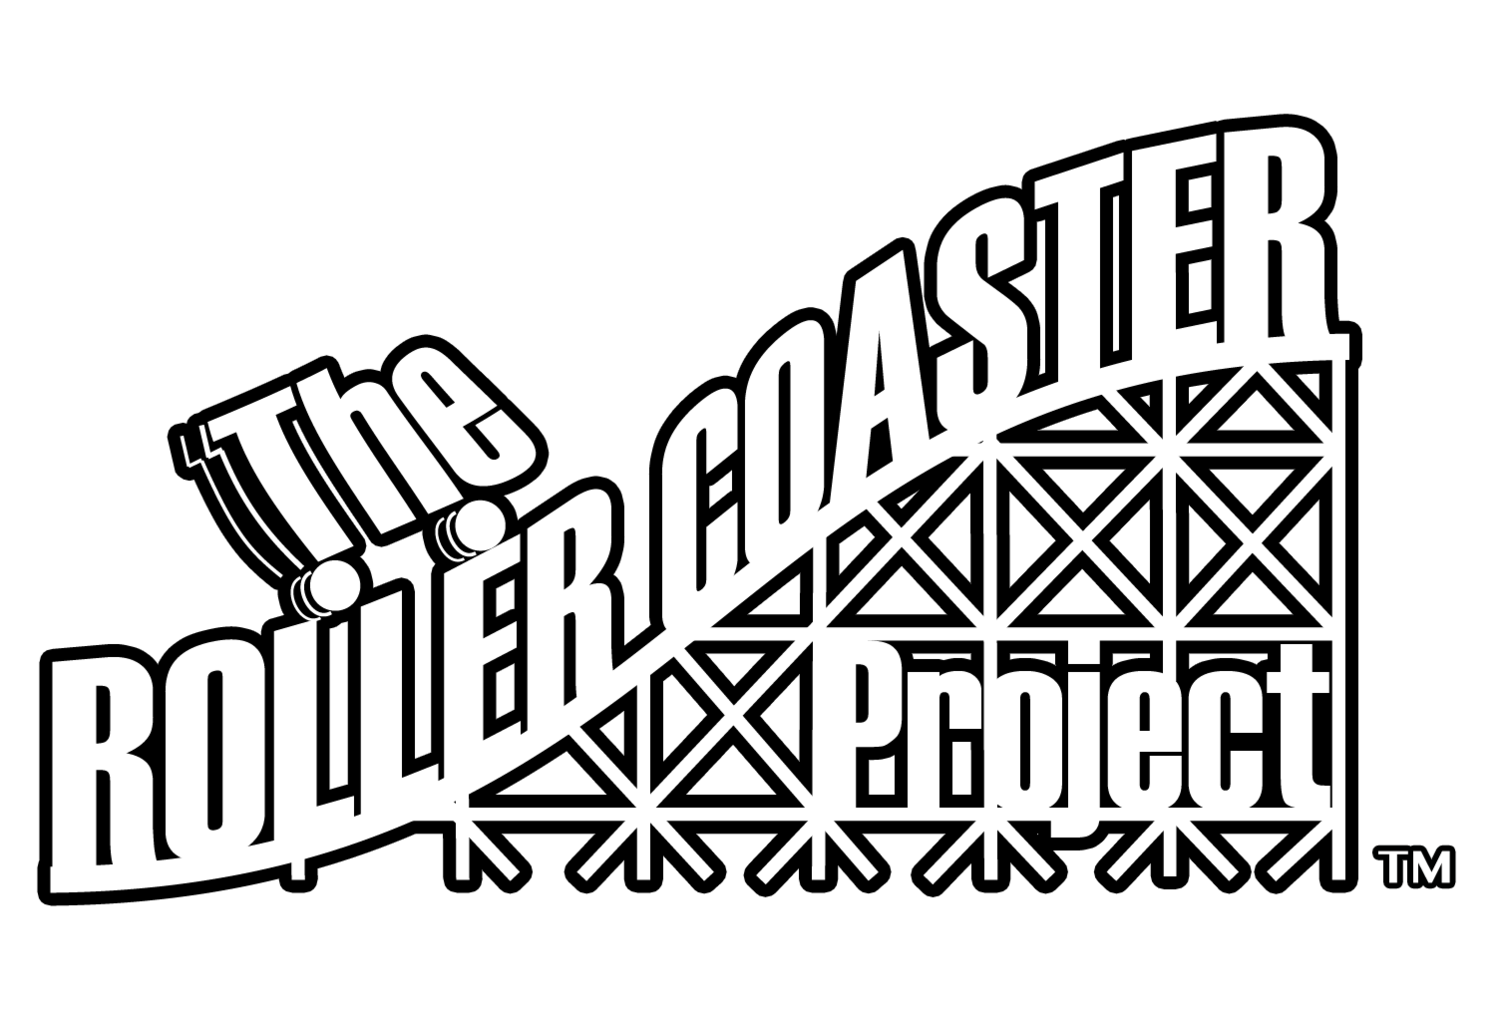 The Roller Coaster Project